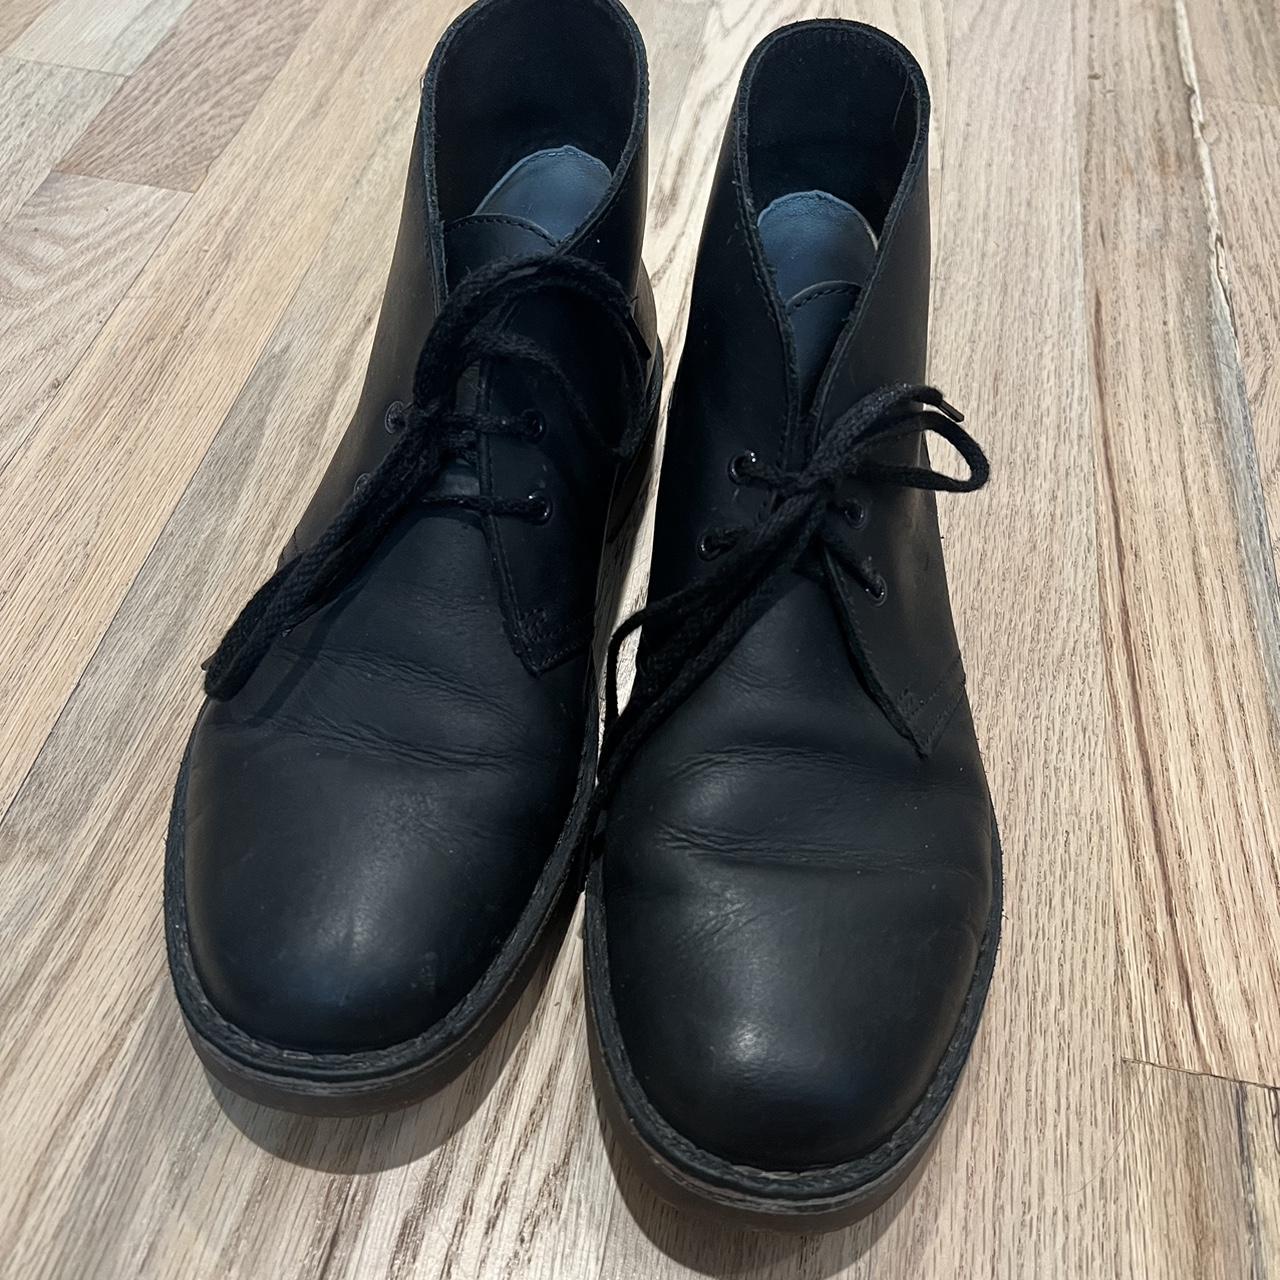 CLARKS classic chukka boot in black leather. Fit... - Depop